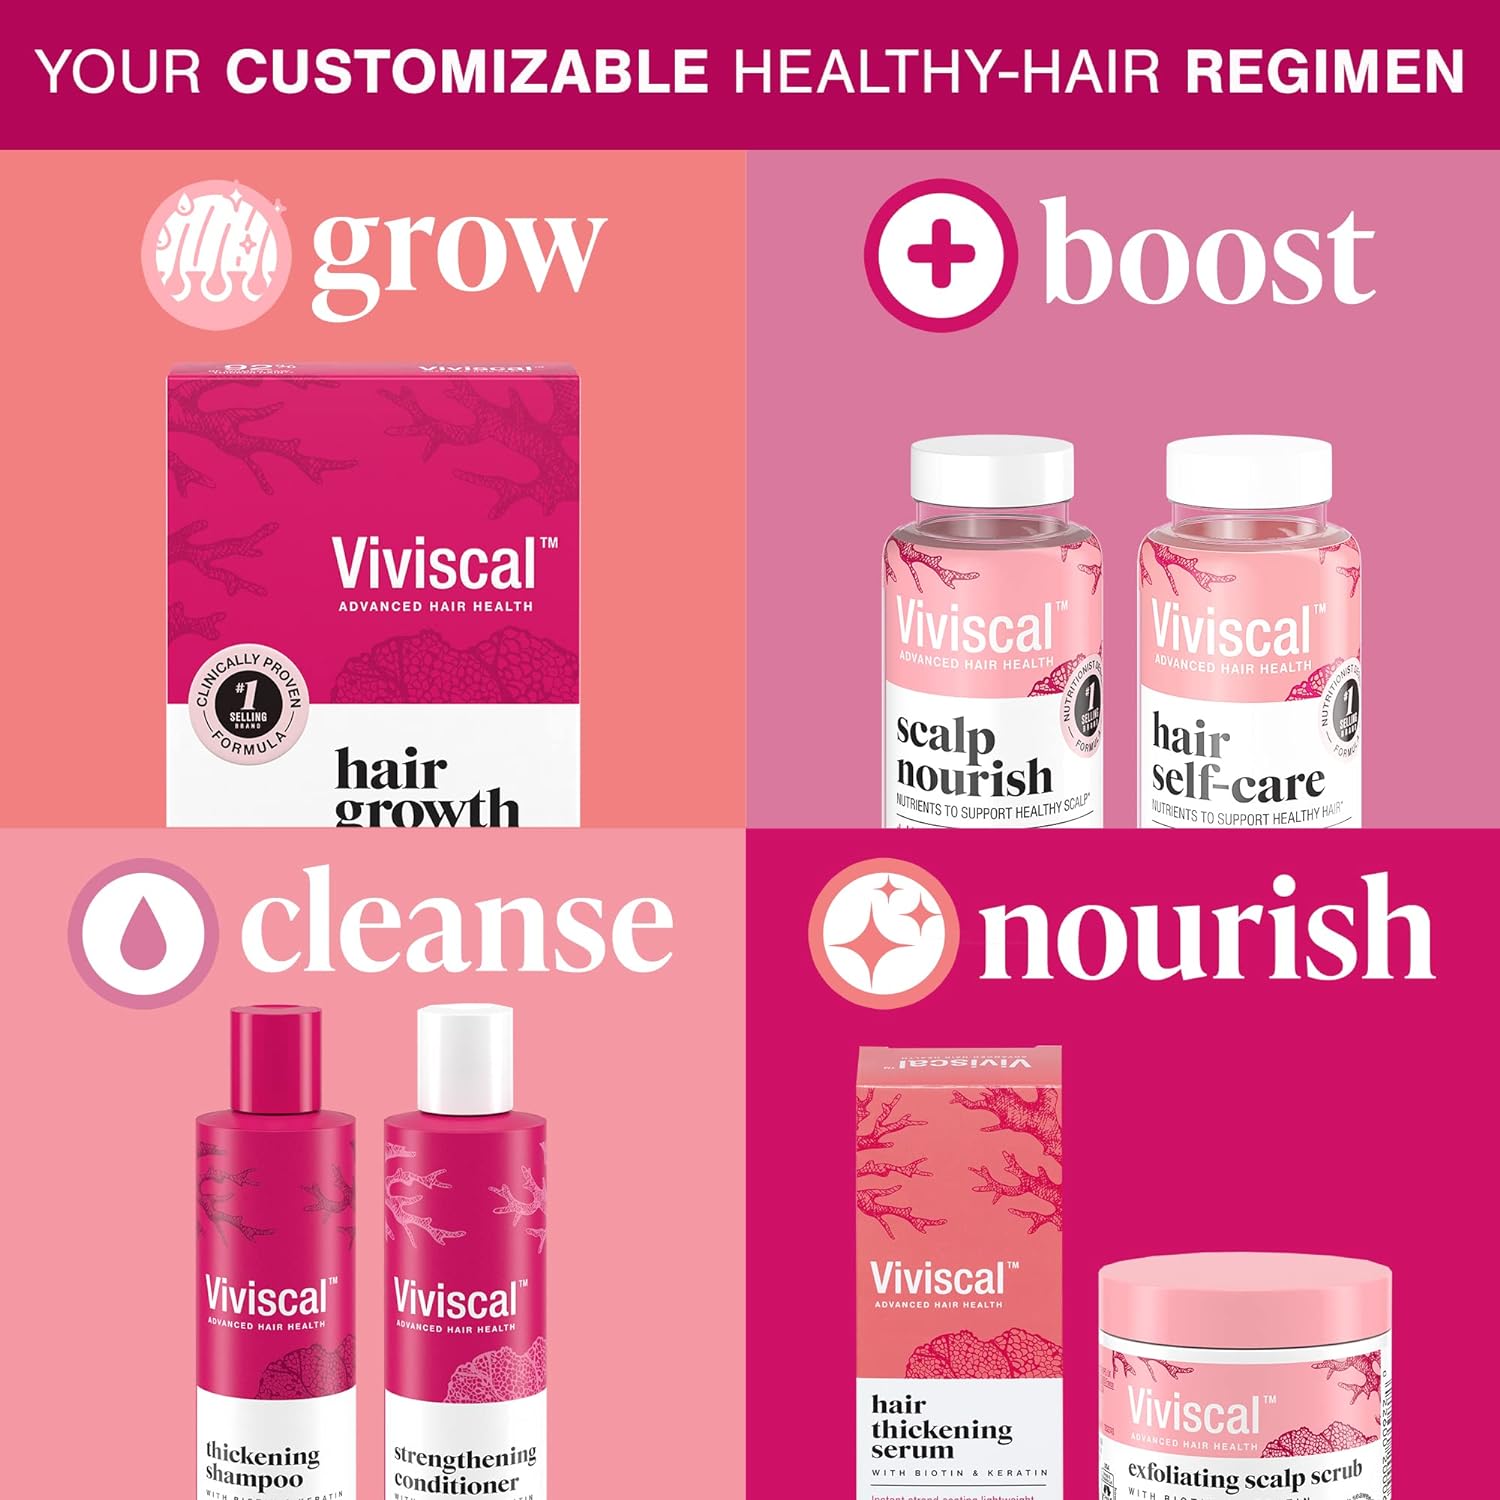 Viviscal grow, boost, cleanse, nourish products